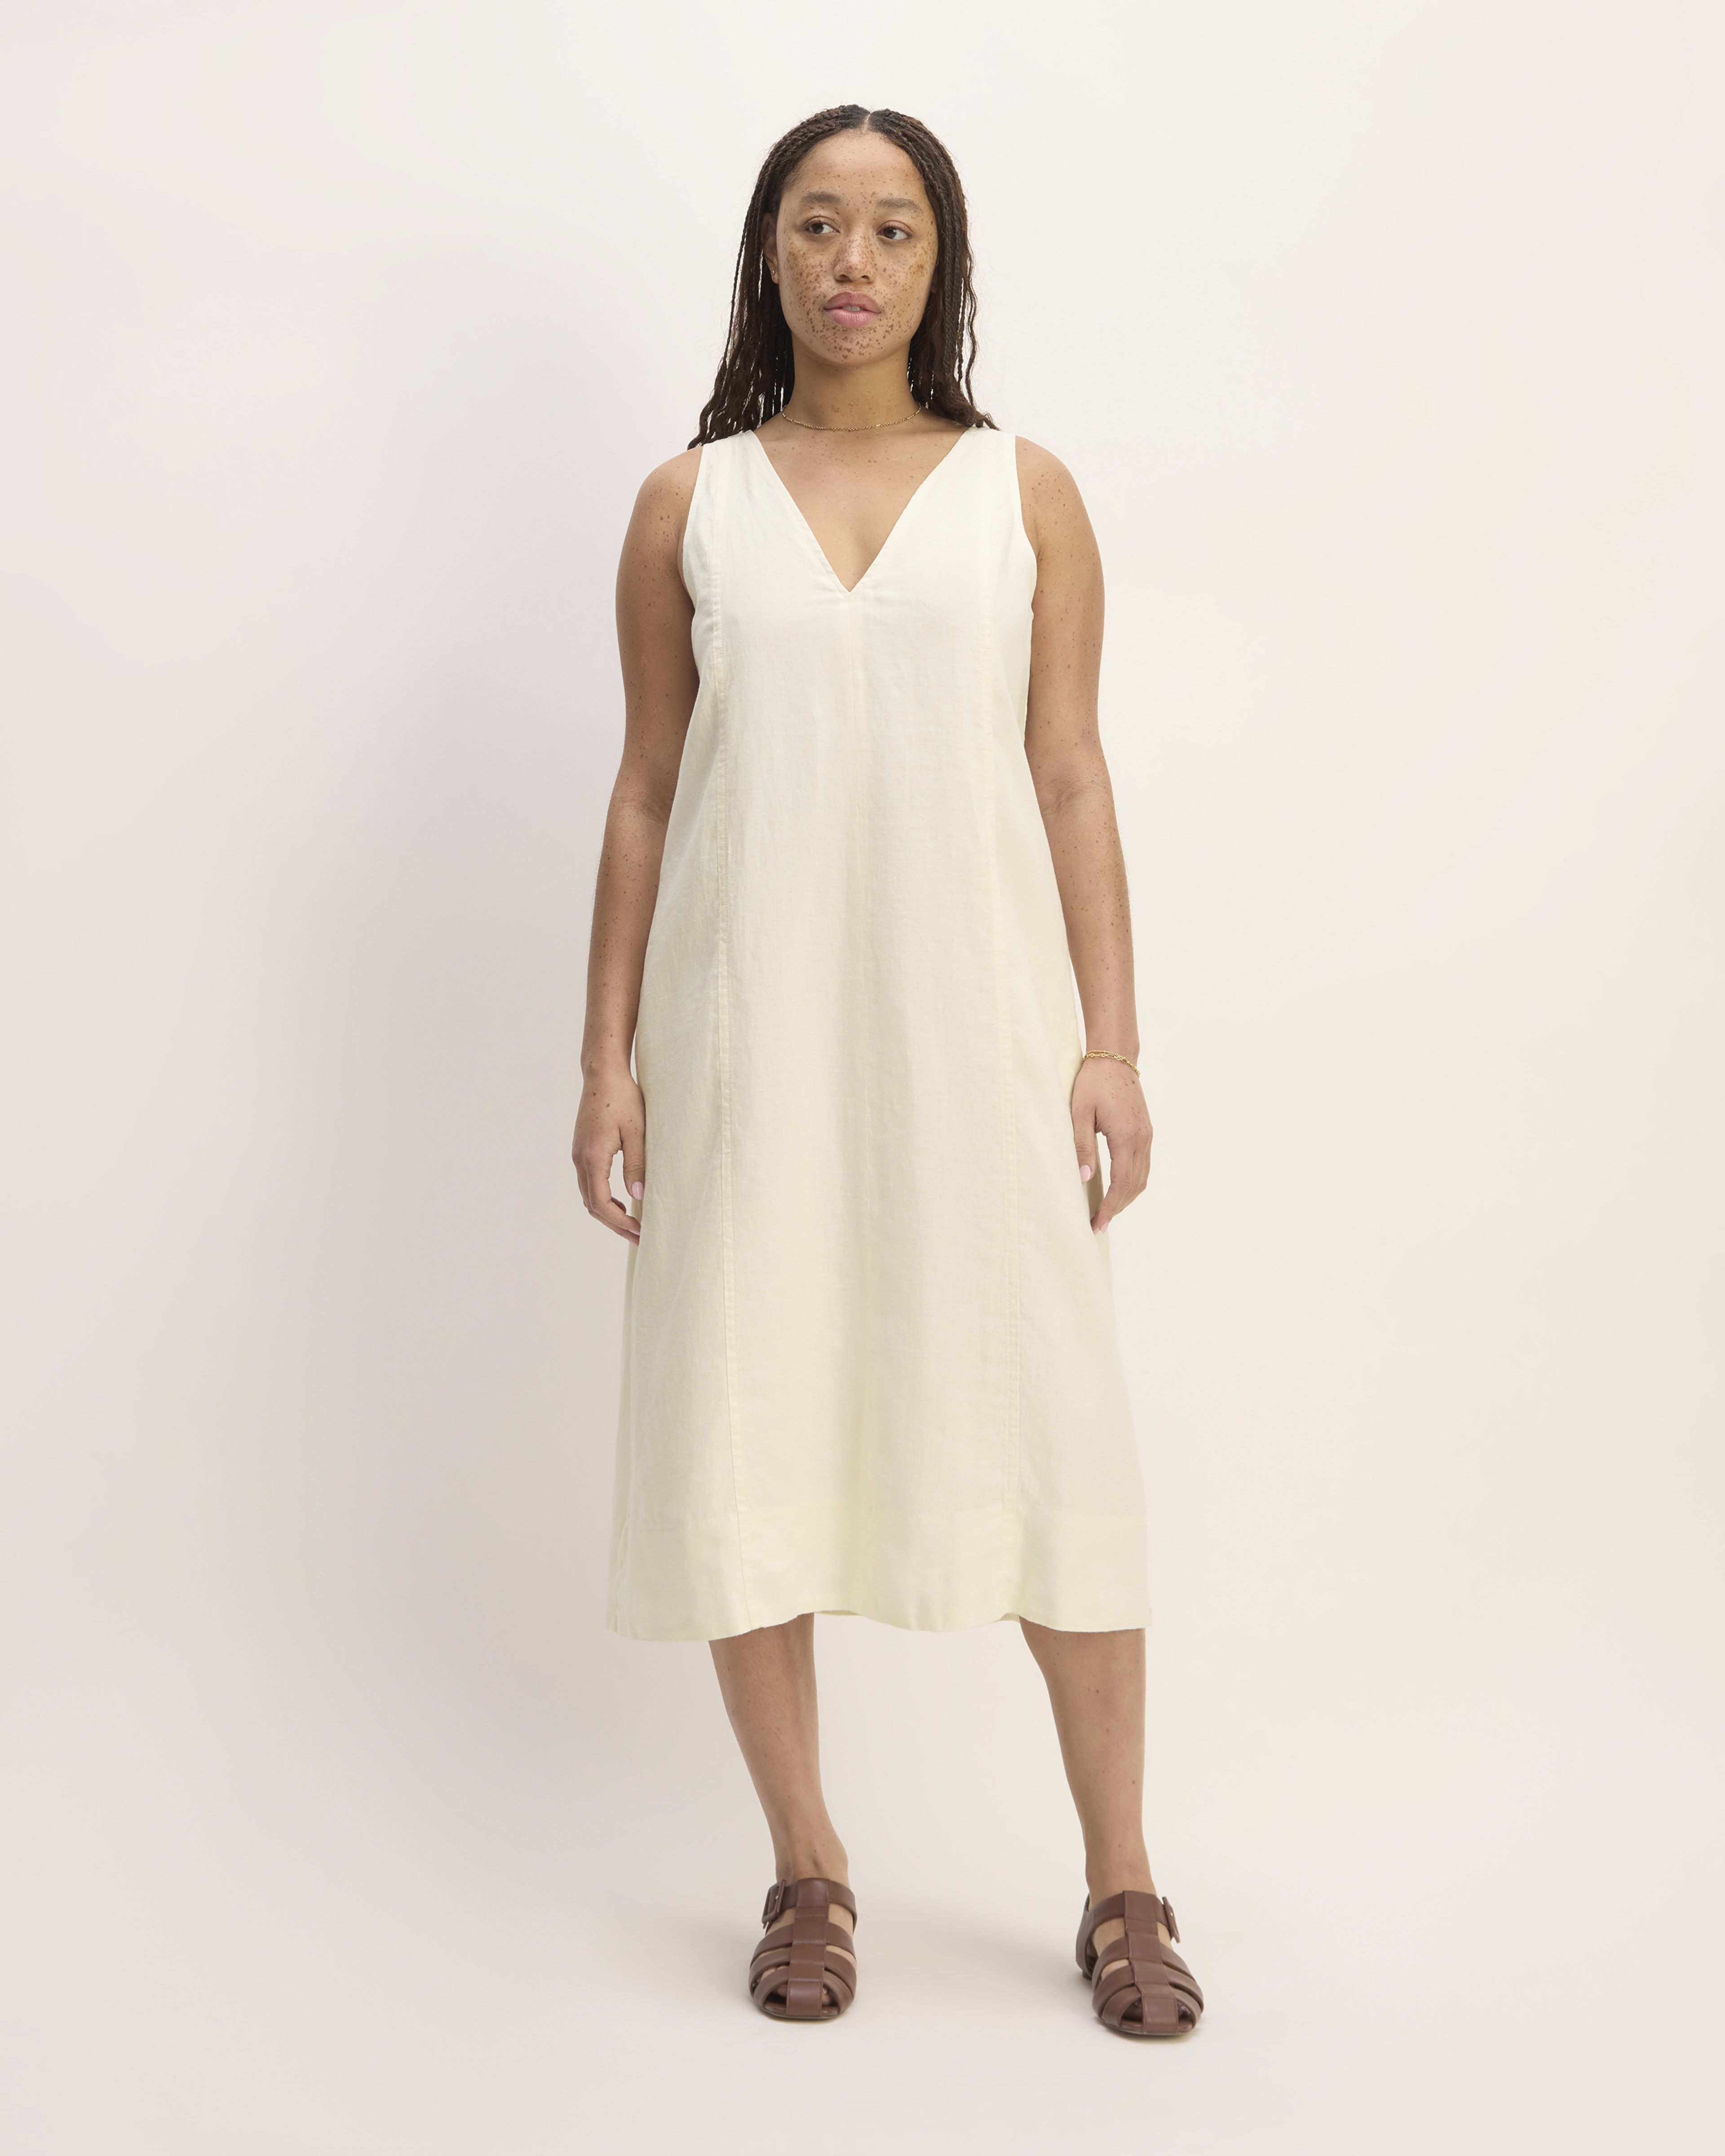 Everlane NWT The Ribbed Tank Dress in Beech Size L - $60 New With Tags -  From Desert